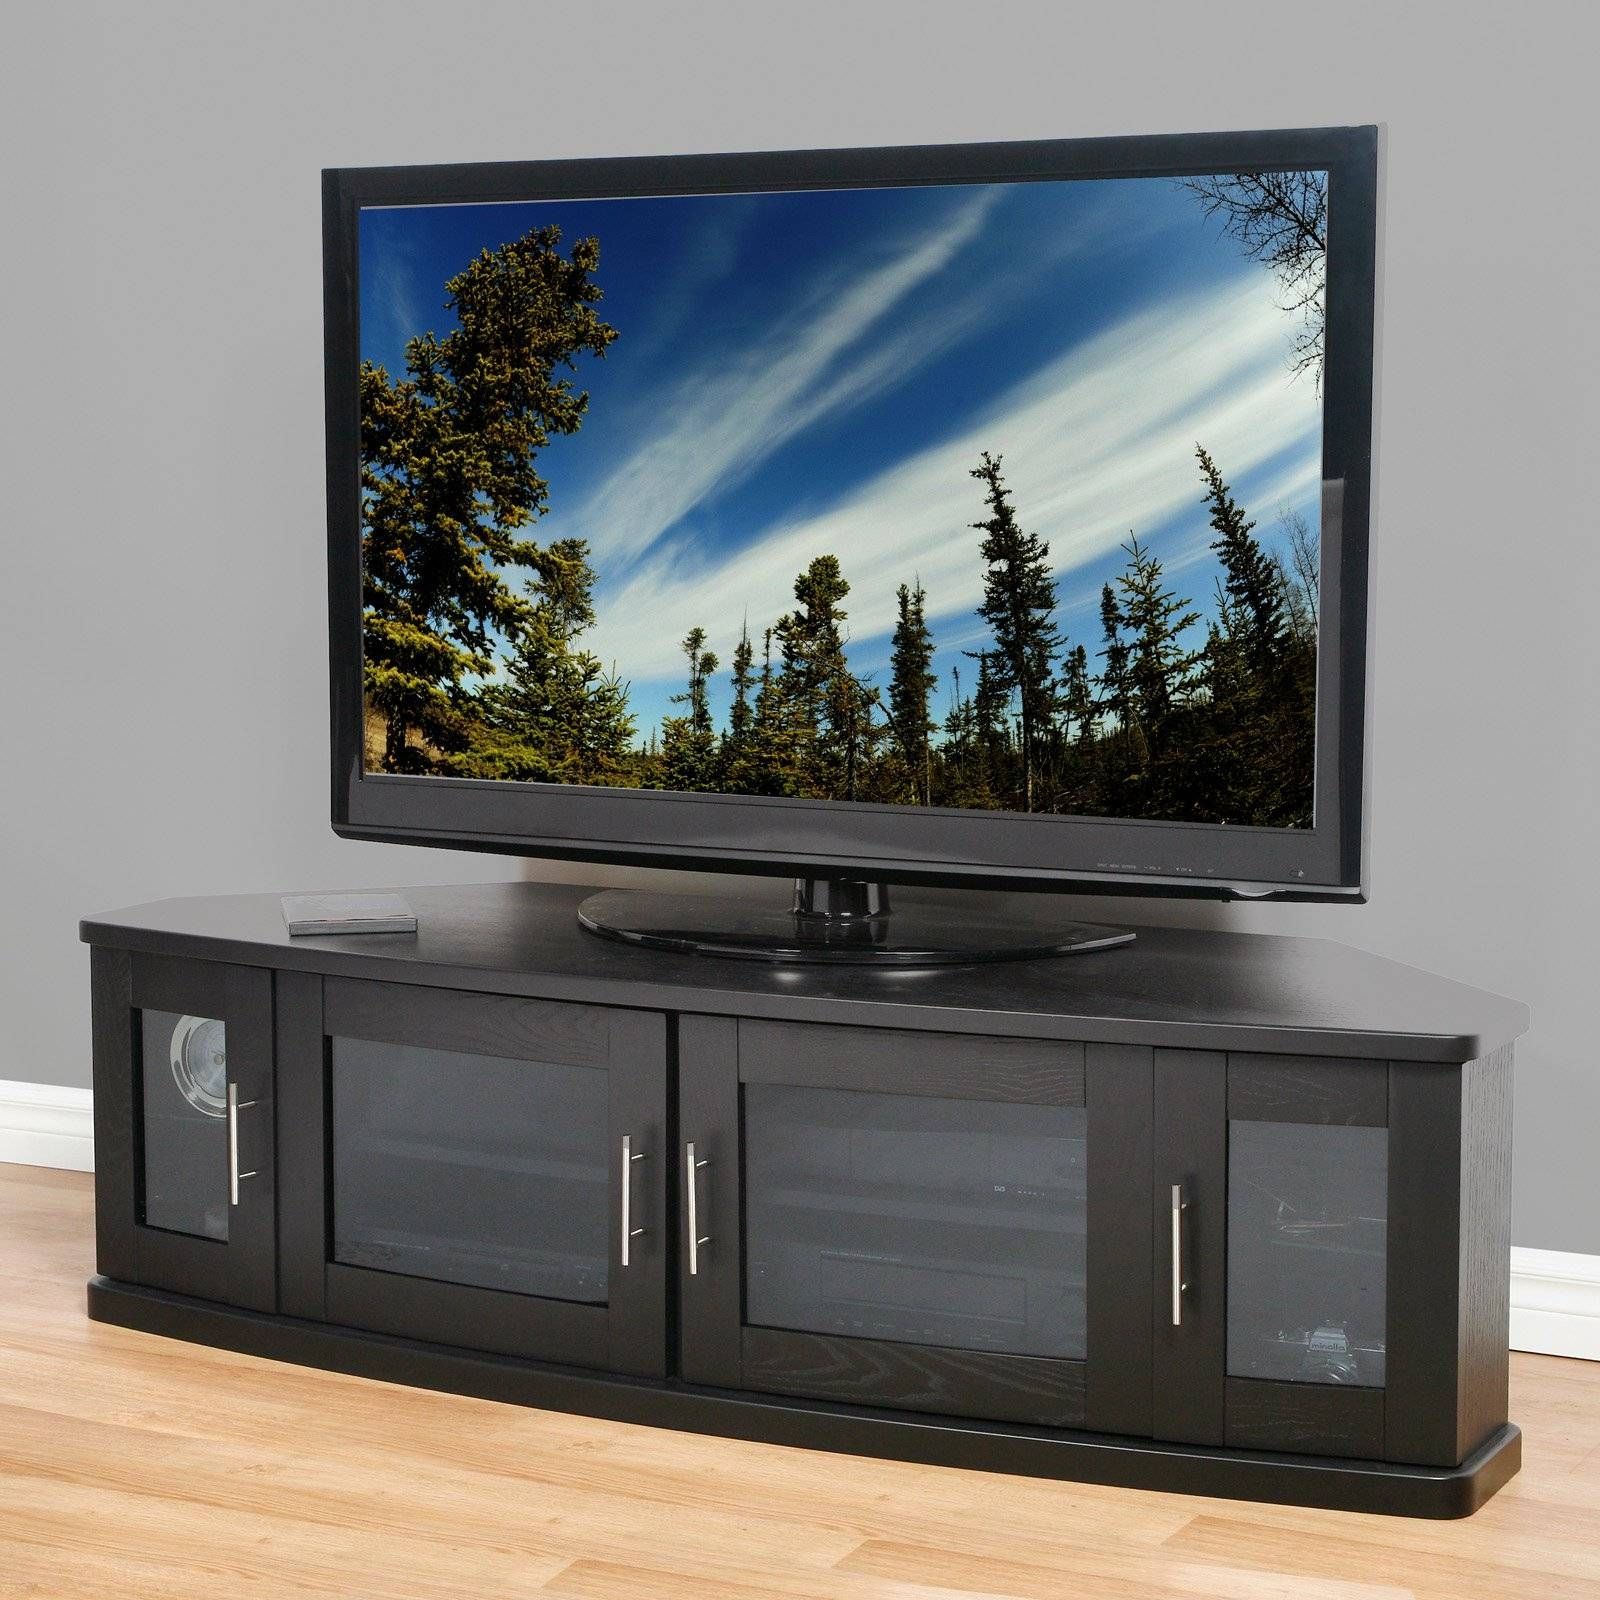 Modern Black Wooden Tv Stand With Frosted Glass Doors Of Dazzling For Corner Tv Unit With Glass Doors (Photo 6 of 15)